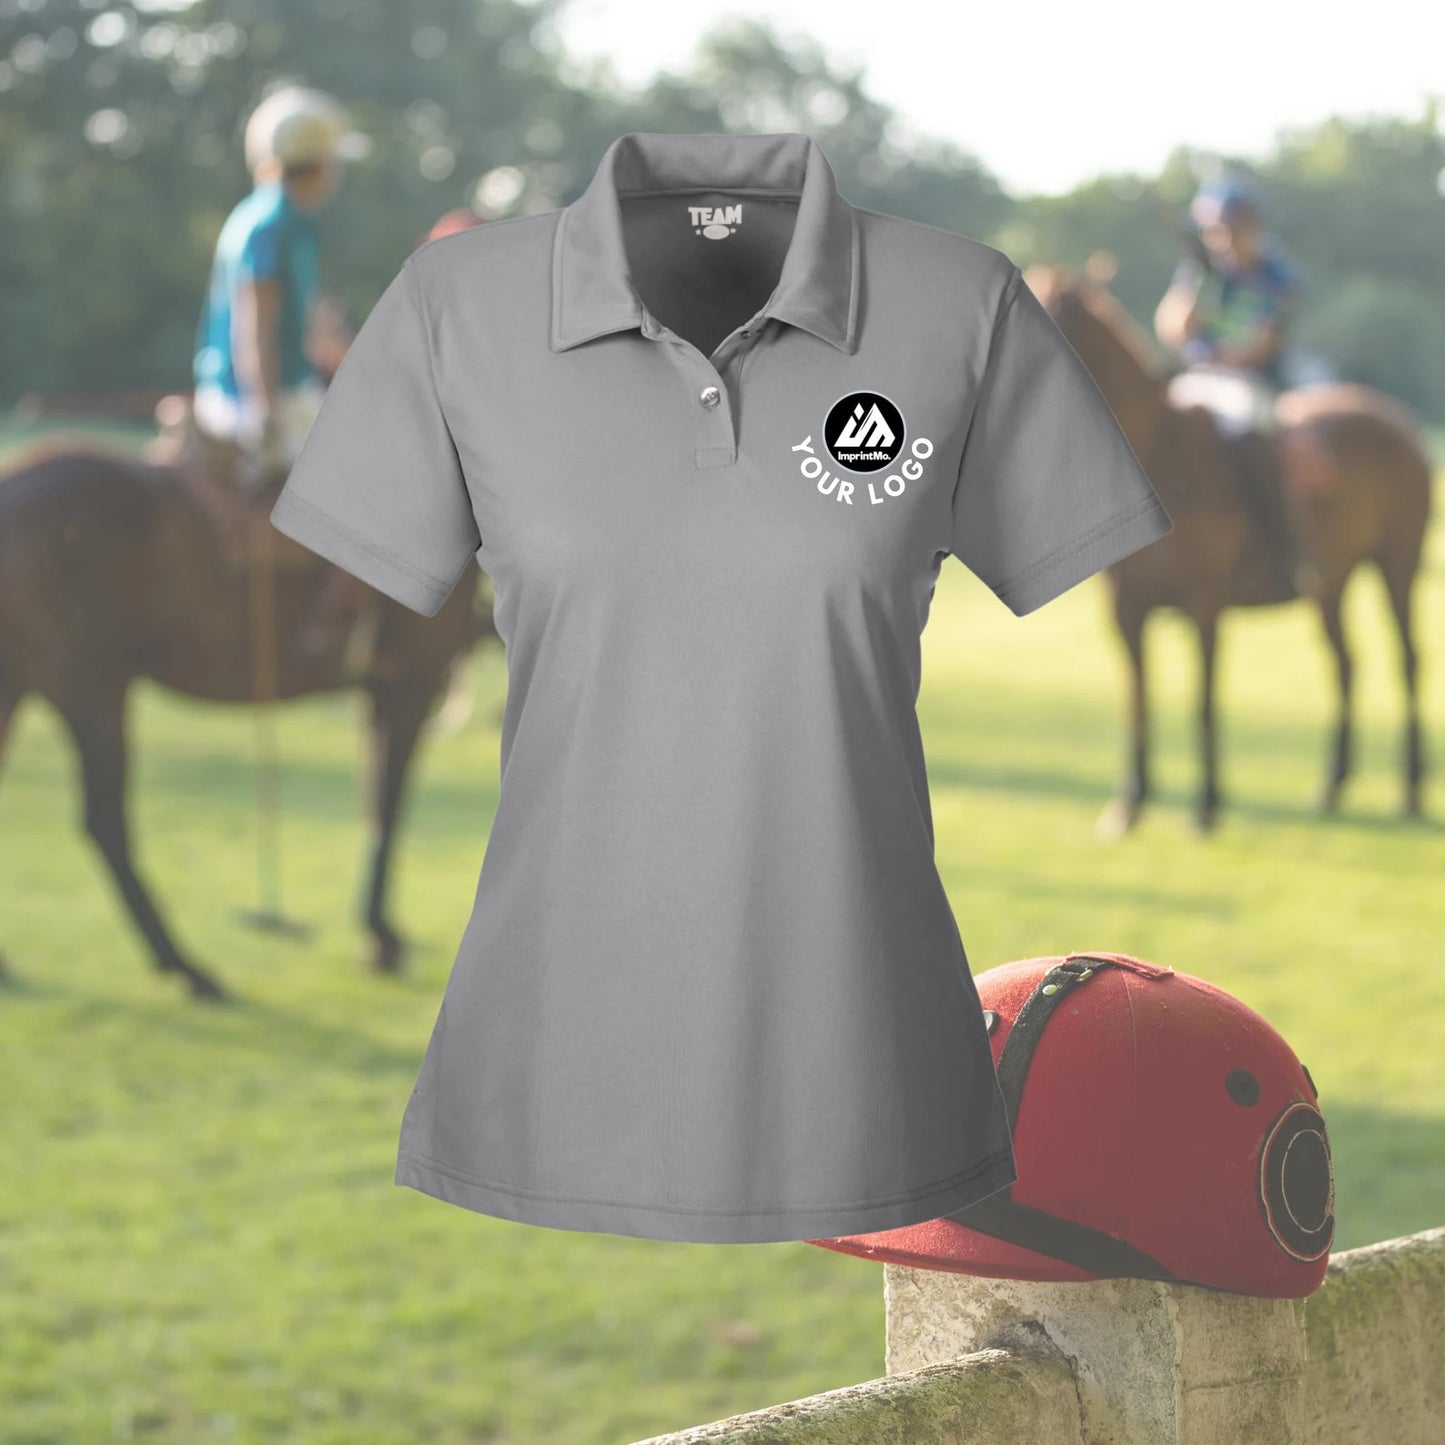 LADIES Polo Shirts Full Color Custom Print - Performance Sport Shirt - Full Color Graphics - Sports Fabric - Moisture-Wicking Graphic Polos